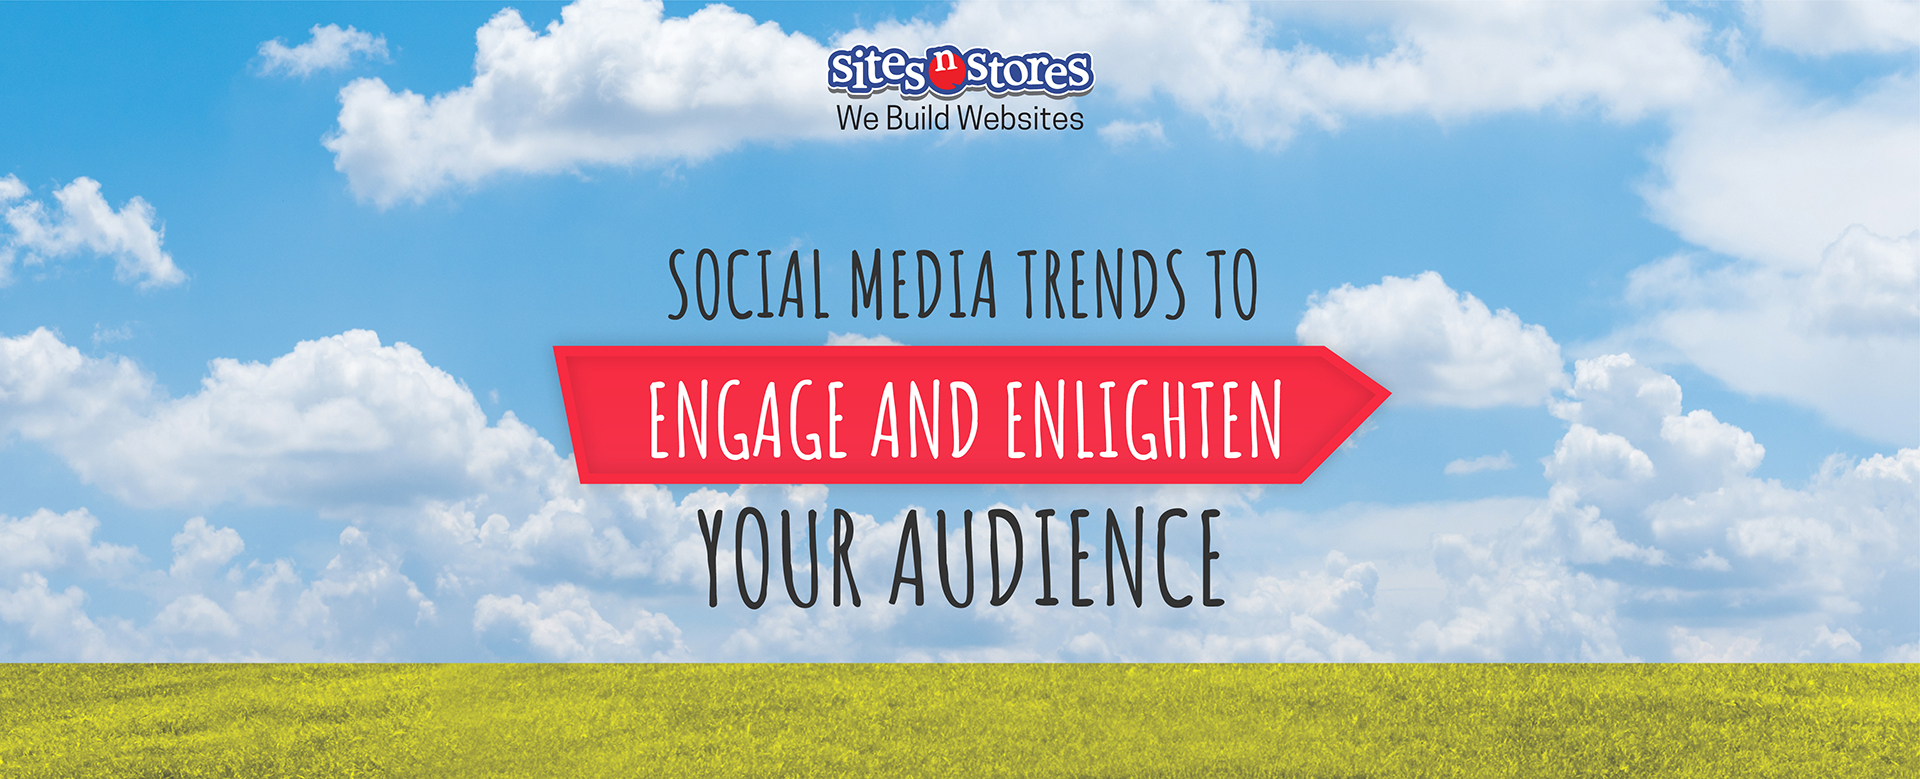 Social Media Trends to Engage and Enlighten Your Audience